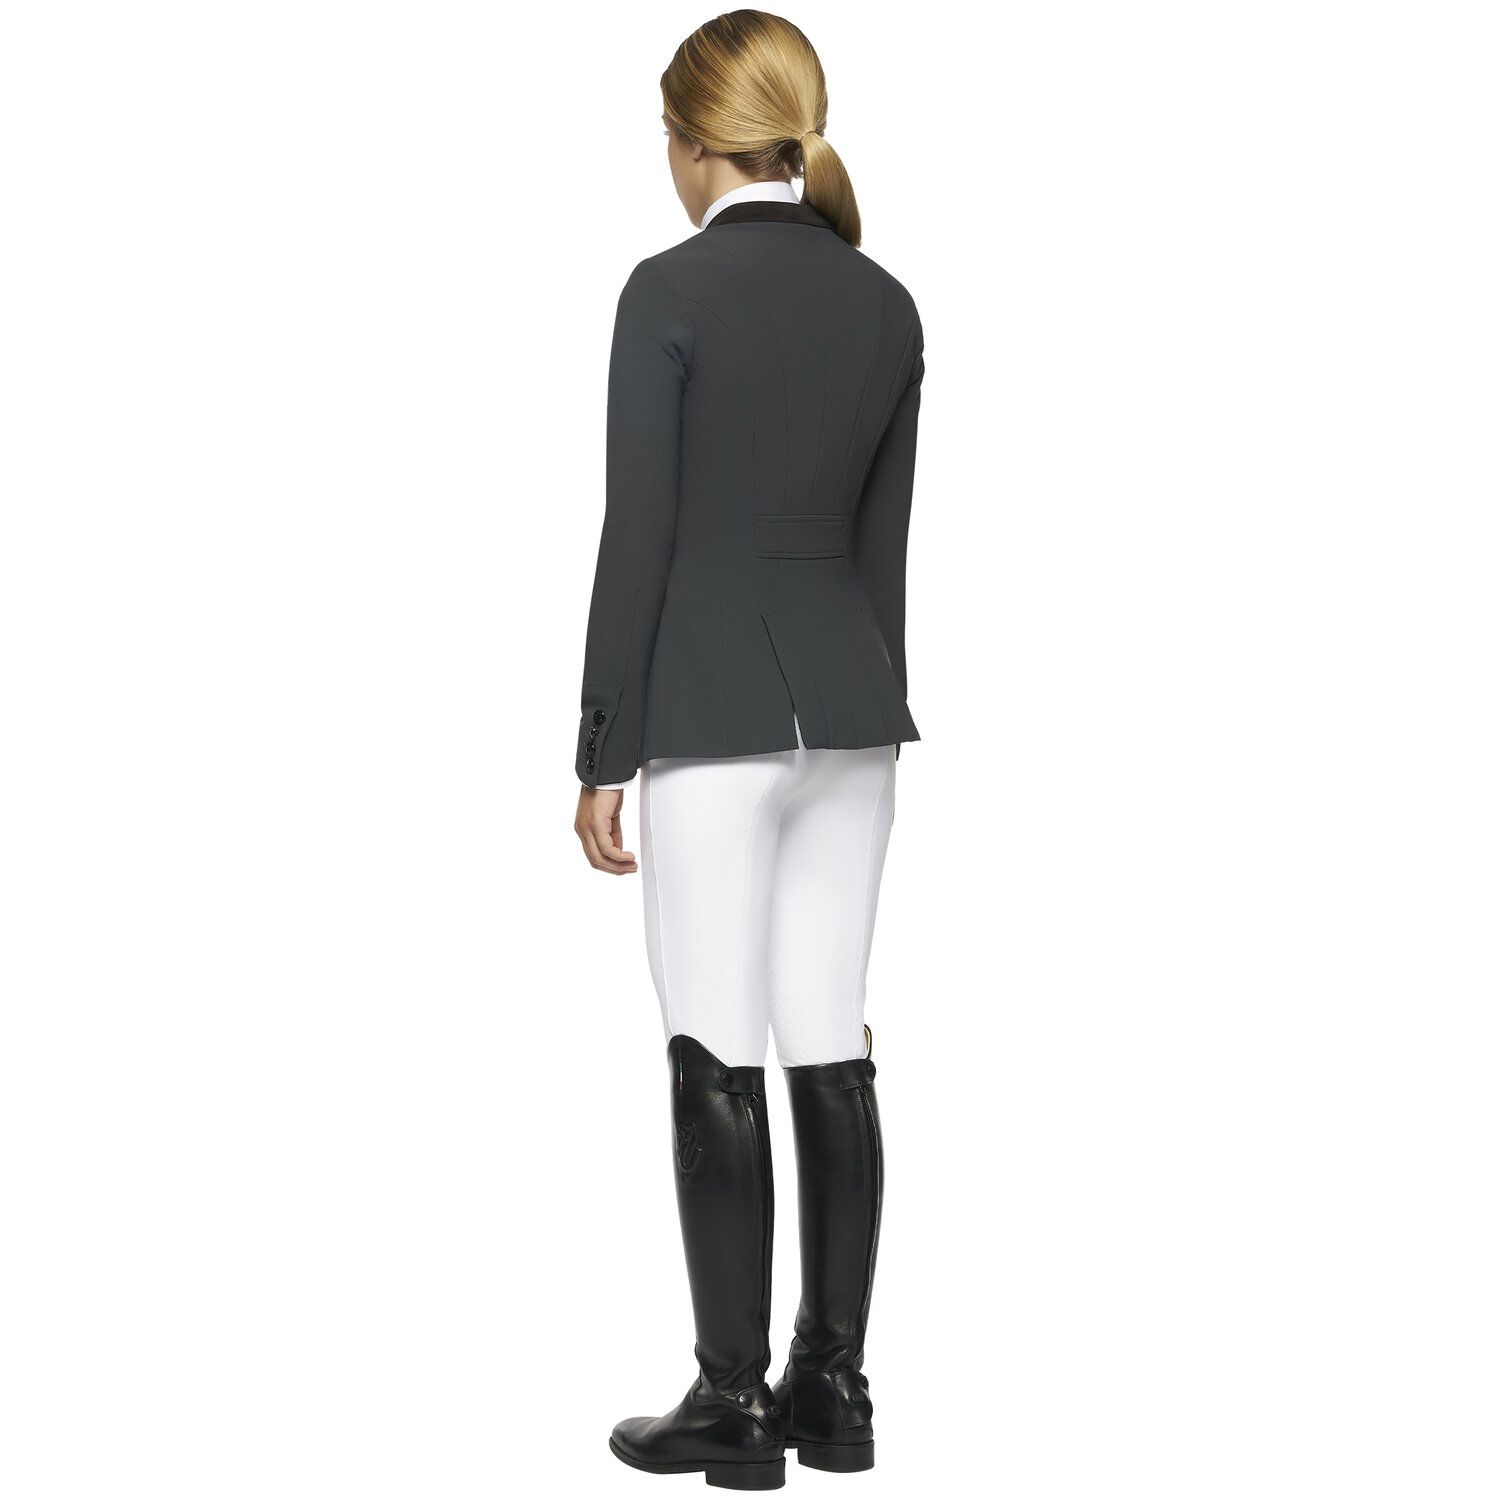 Cavalleria Toscana Women's competition riding jacket. CHARCOAL GREY-3